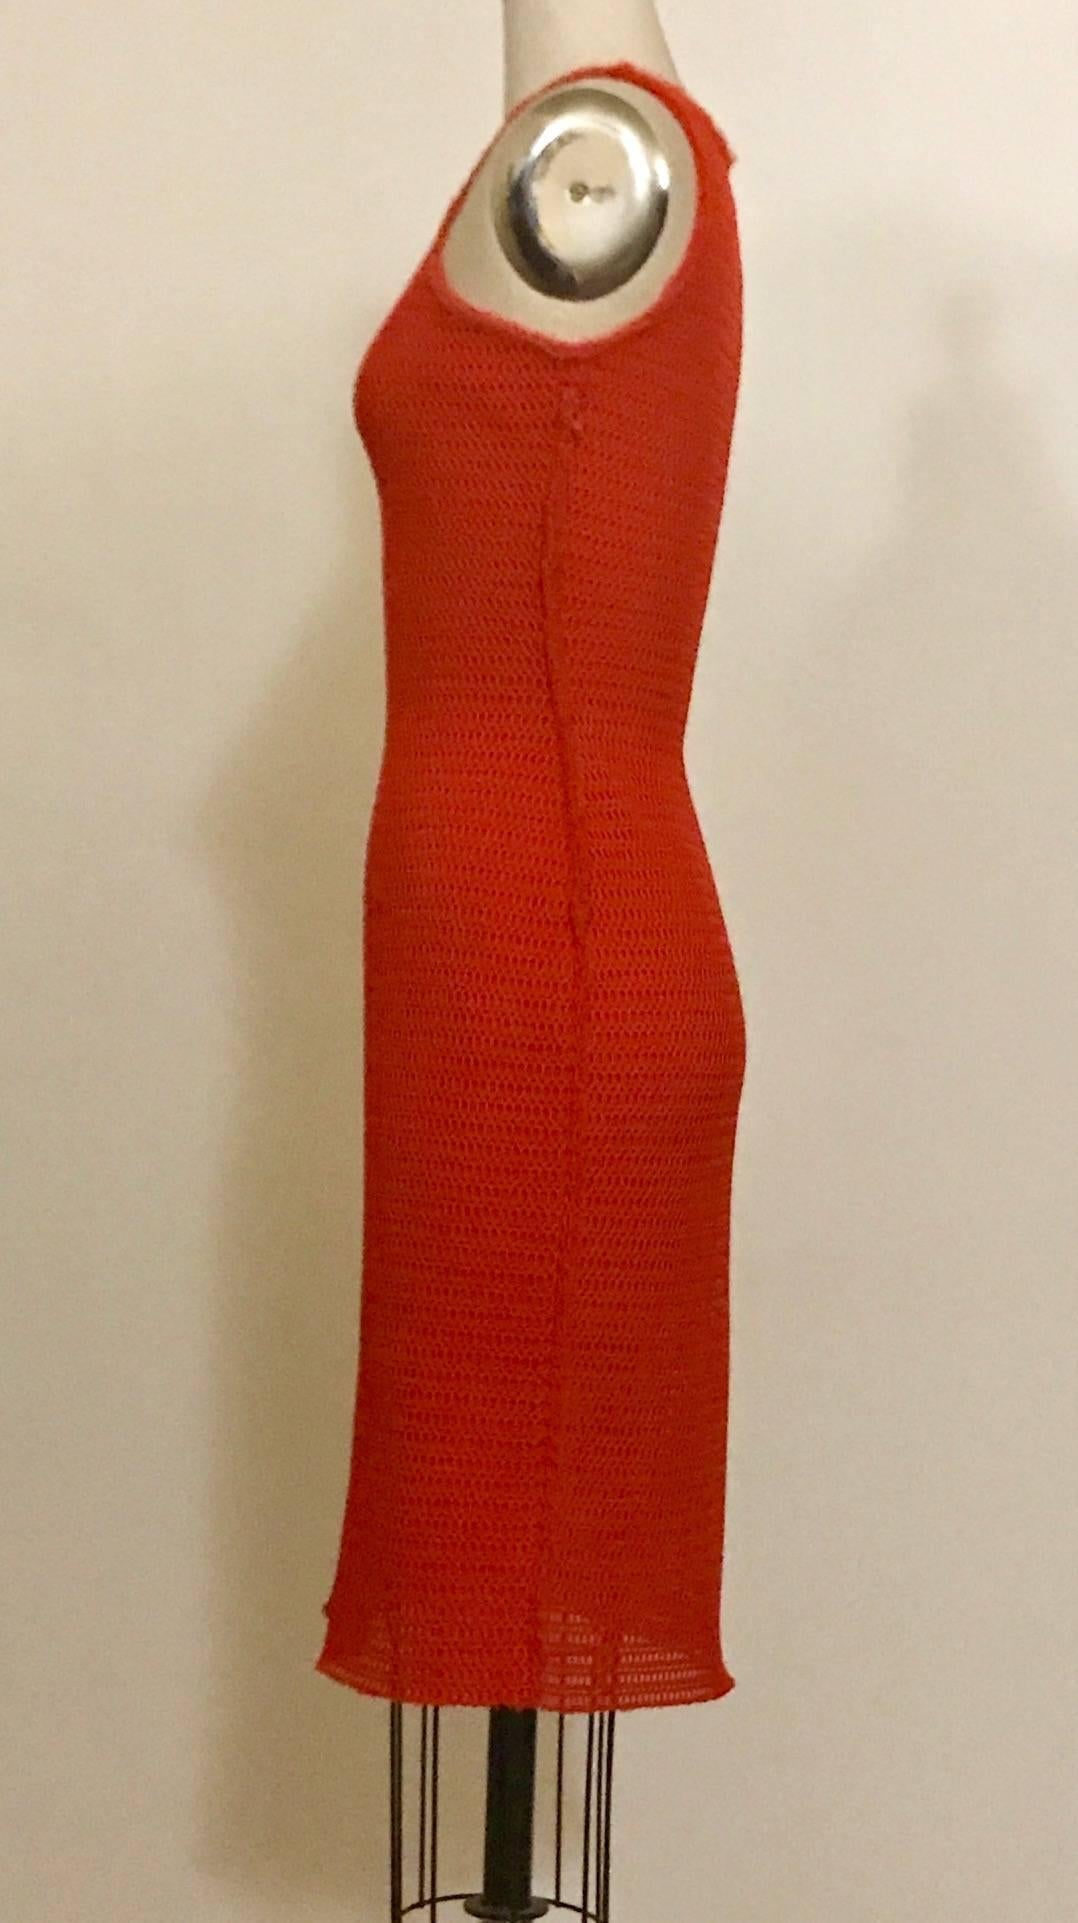 Lanvin red knit mesh body con dress features two overlapping layers of mesh. Very slightly sheer (tiny peekaboos where the mesh holes overlap.) Raw edged chiffon-like trim around neck, arm holes, and at side seams. Side zip.

100% polyamide. 

Made